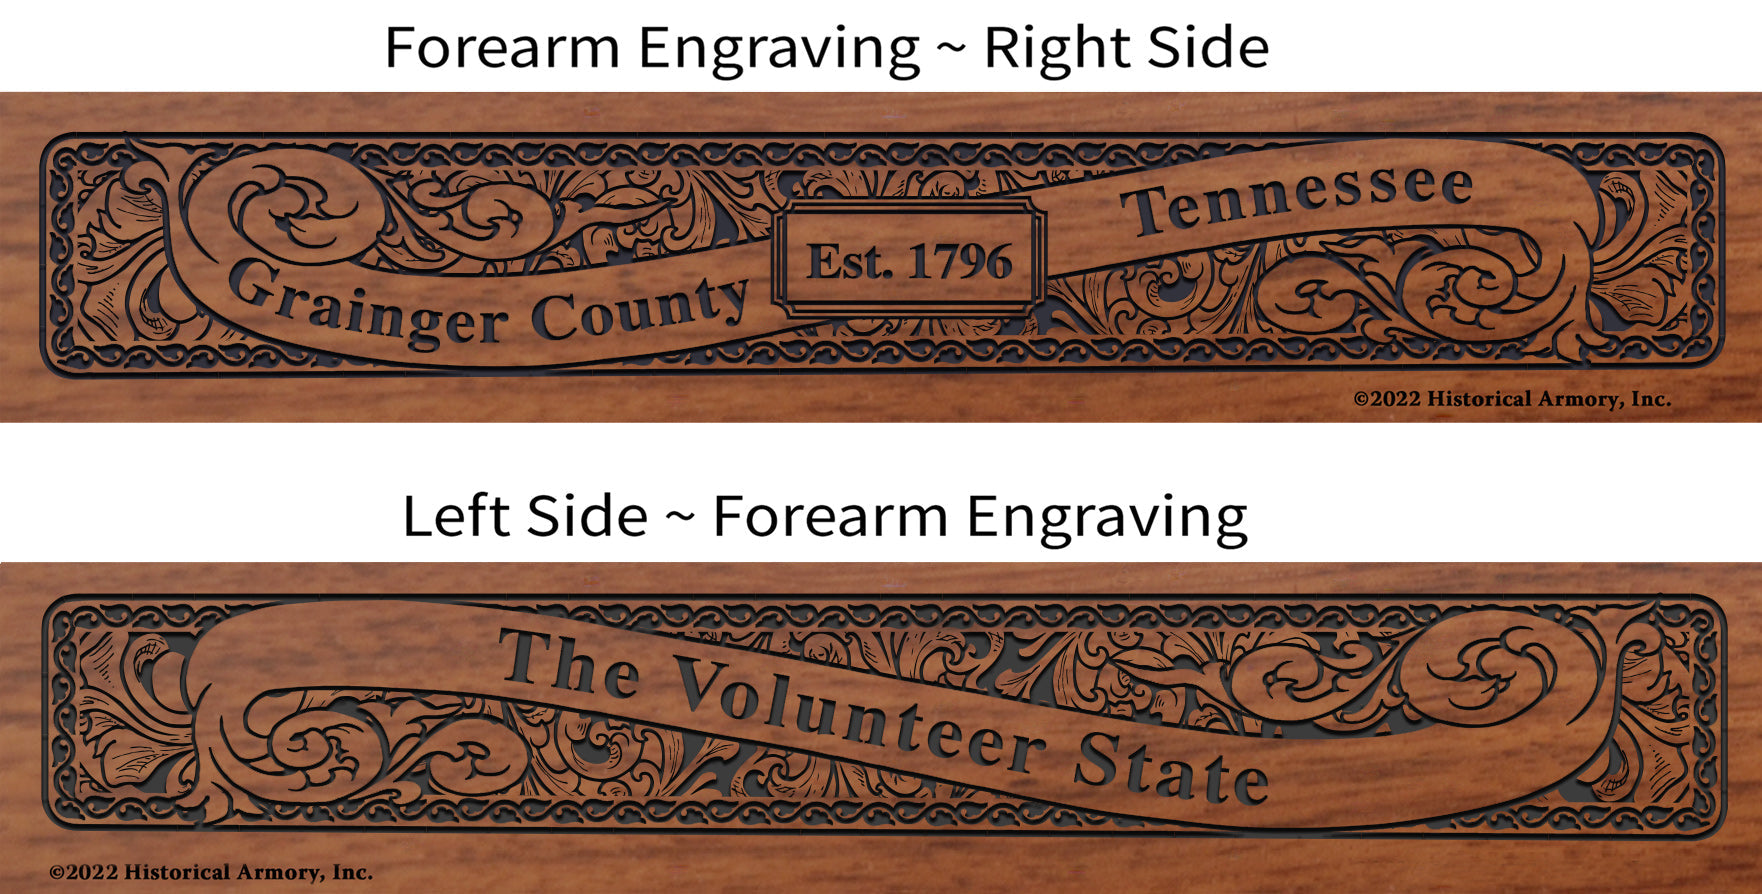 Grainger County Tennessee Engraved Rifle Forearm